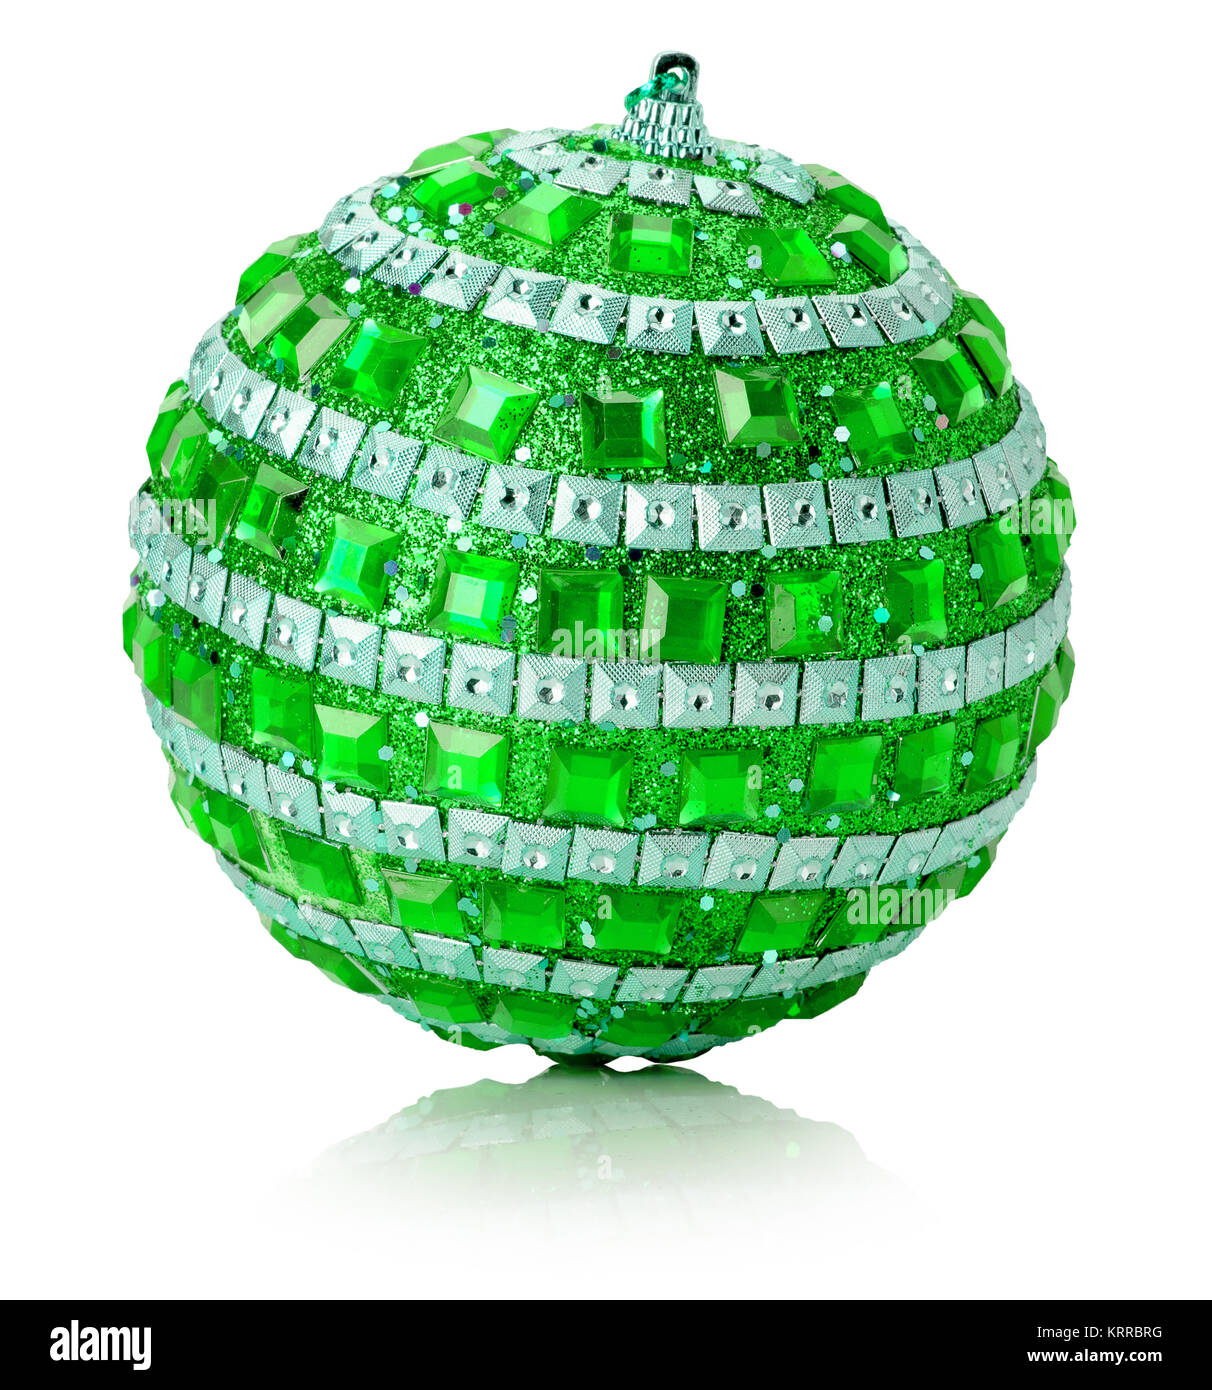 green Christmas tree ball isolated on a white background. Stock Photo